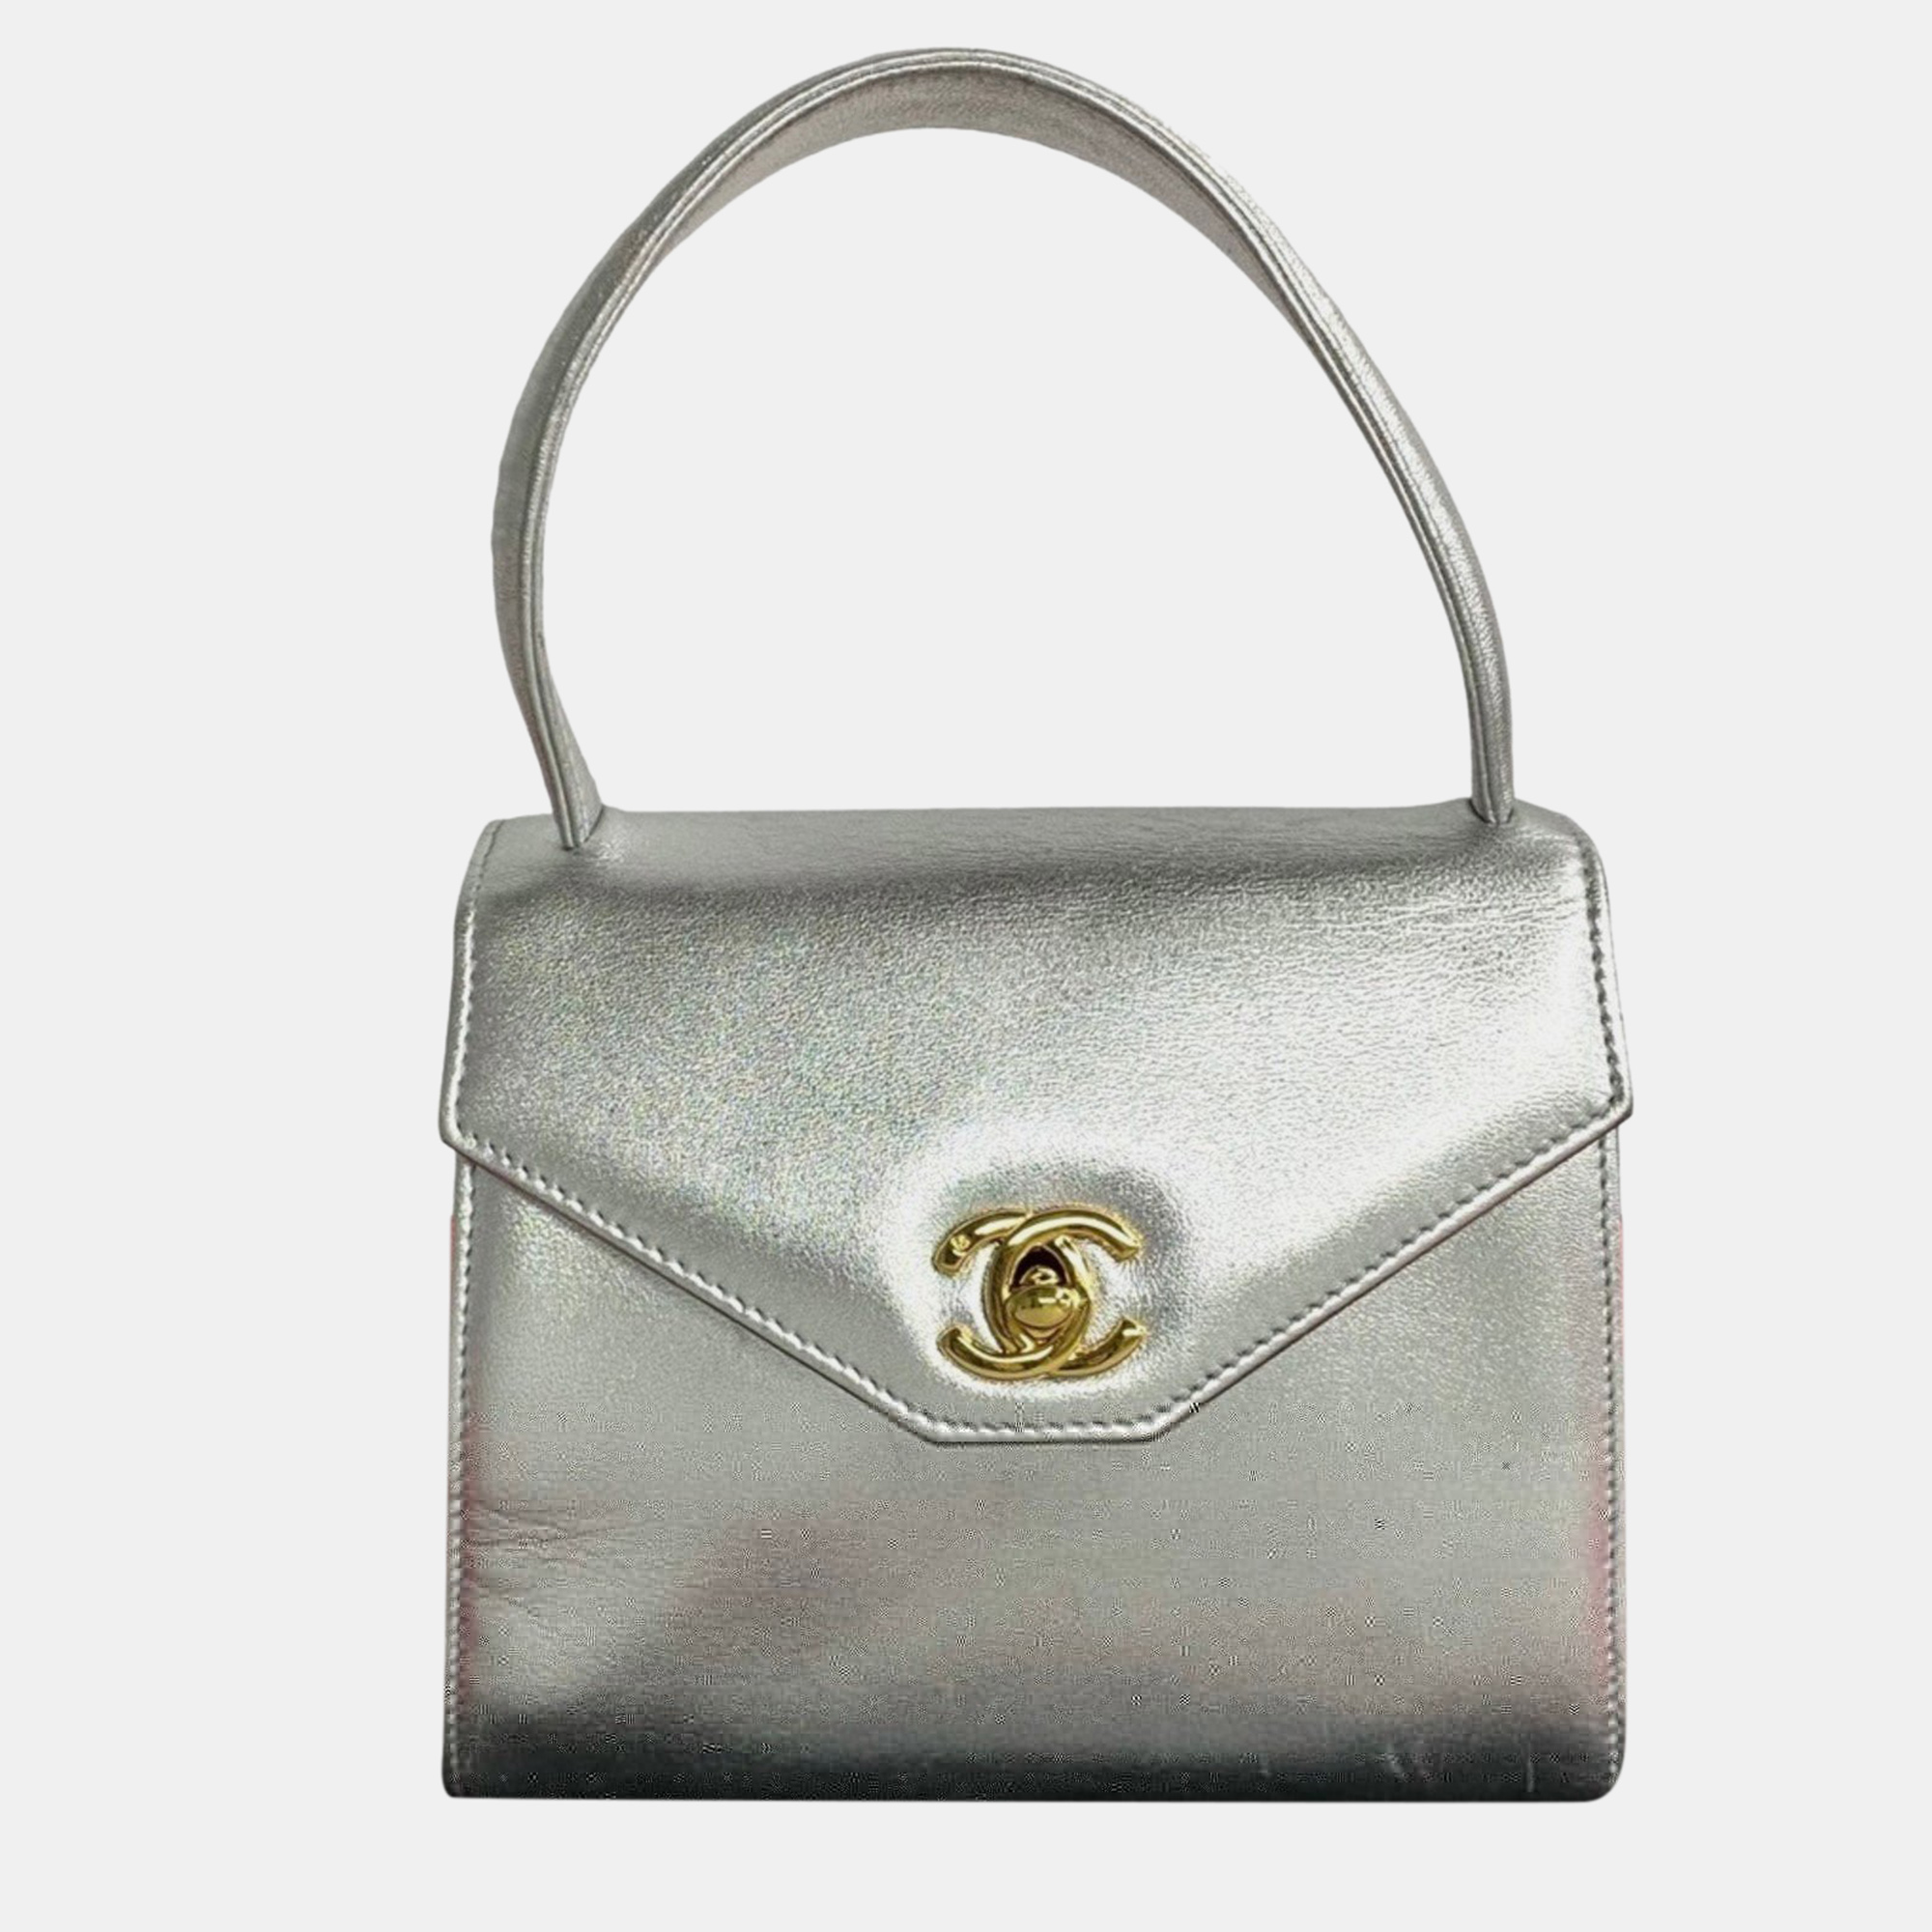 Chanel silver leather small kelly flap top handle bags